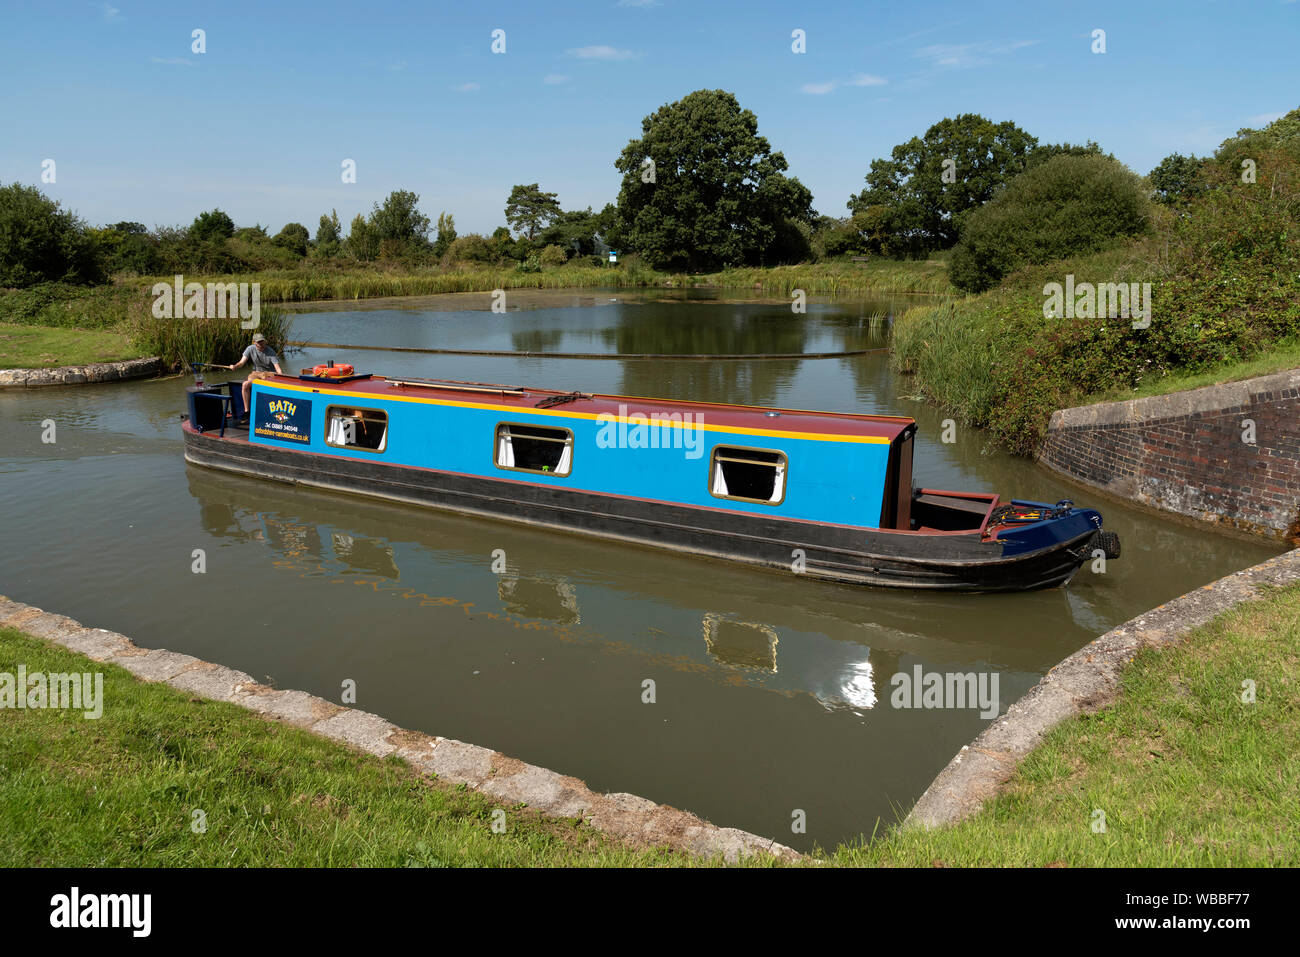 Devizes, Wiltshire, England, UK. August 2019. Narrowboat entering a lock on the Caen Hill flight of locks on the Kennet and Avon Canal. Stock Photo